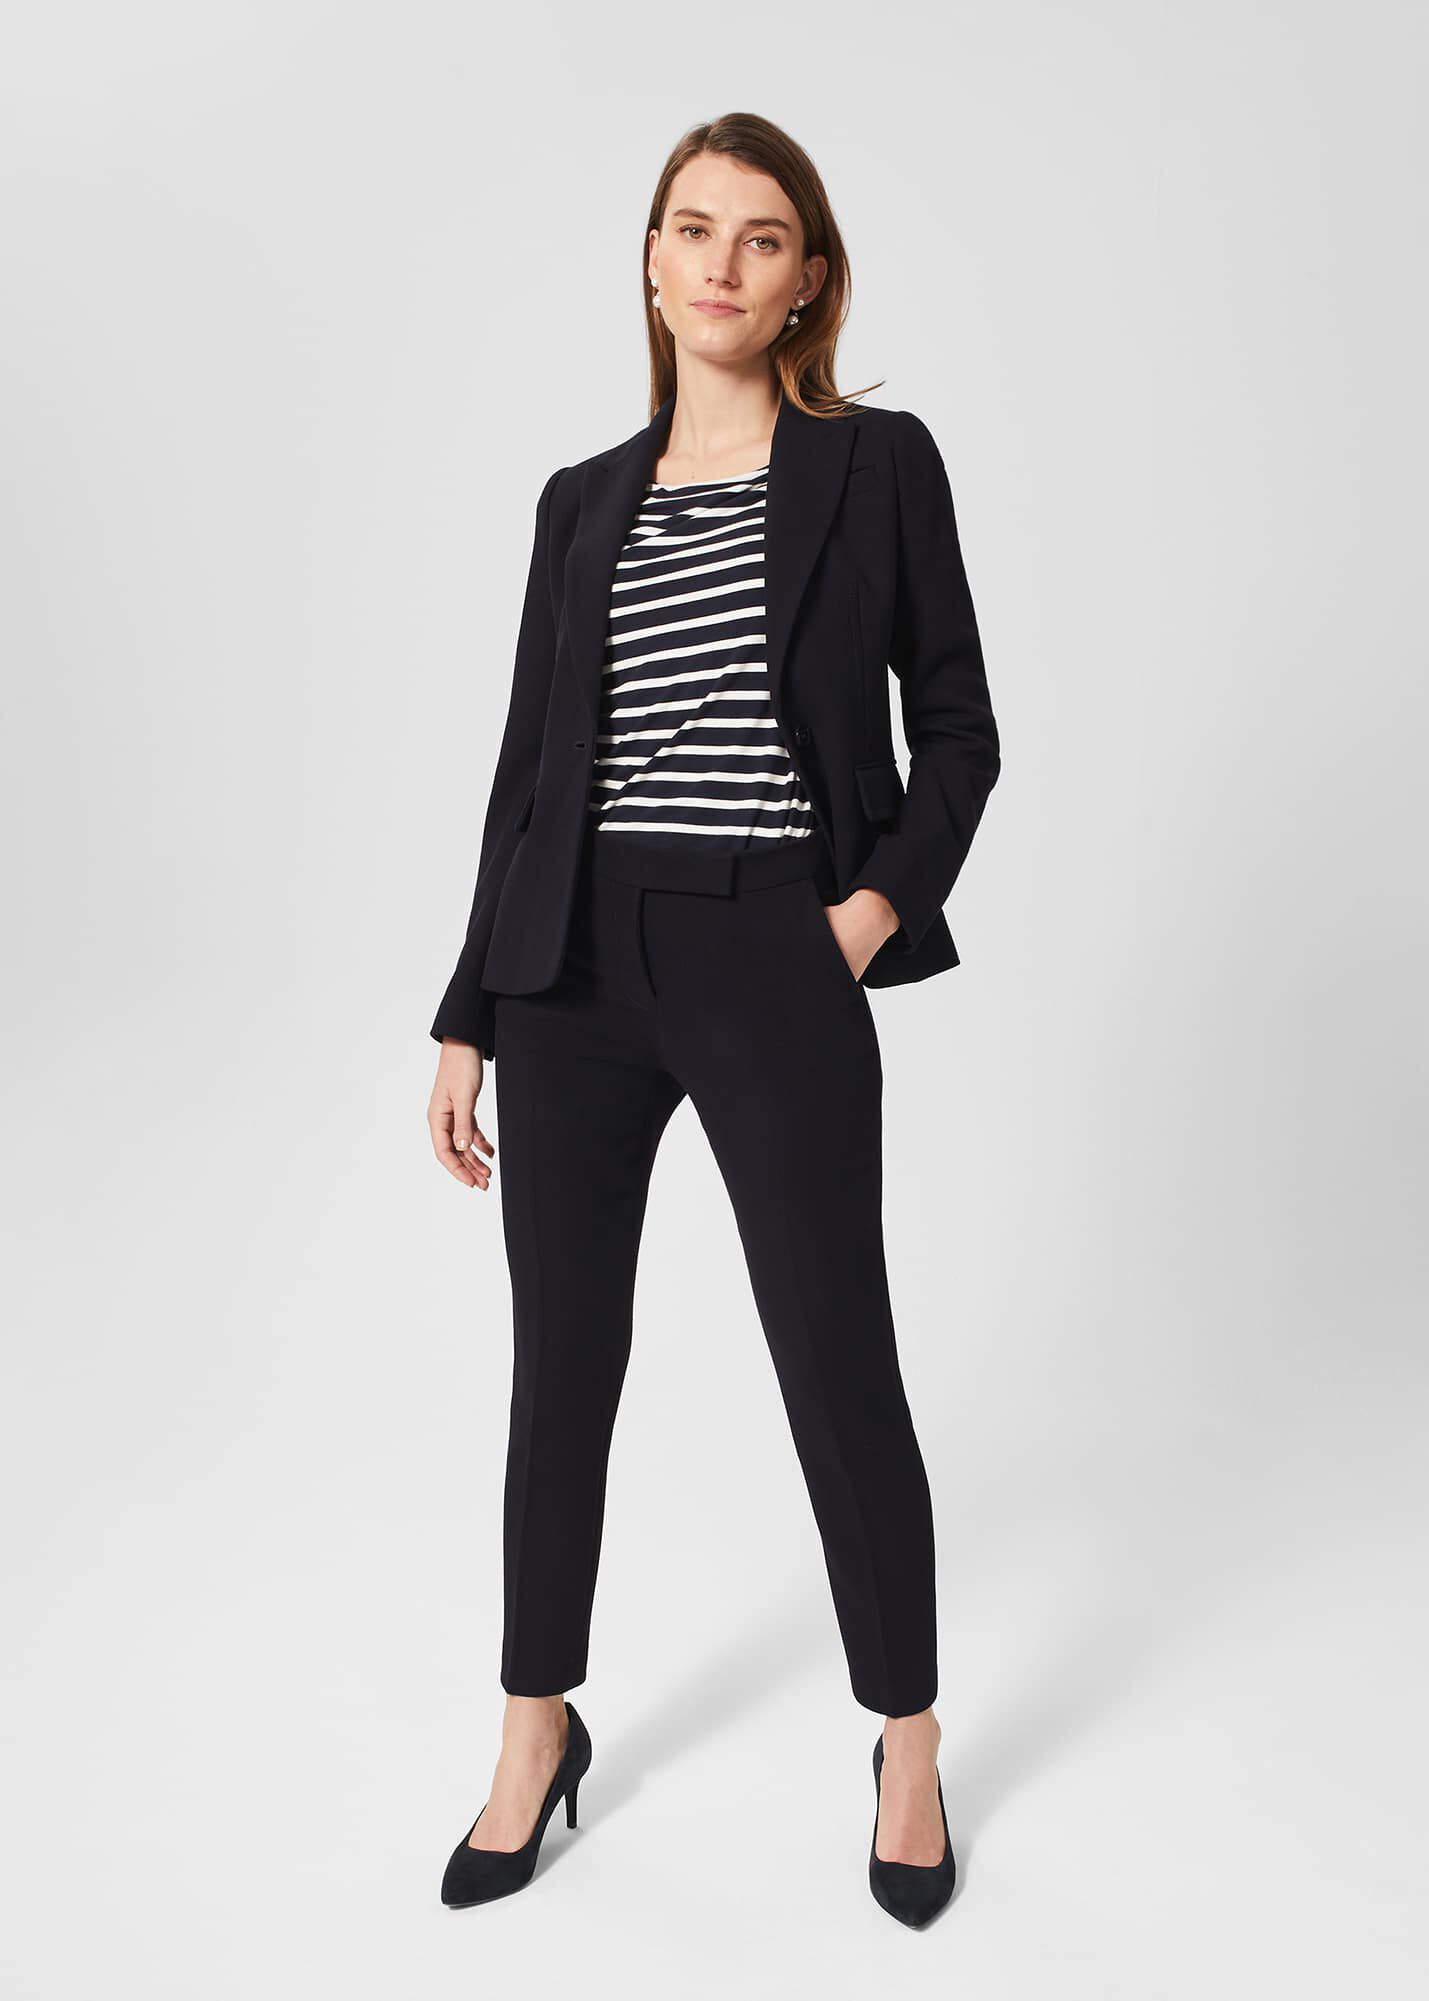 Womens Formal Two Piece Pants Suit In Brown, Navy, And Black For Business  And Autumn/Winter Wear Jacket And Next Ladies Trouser Suits Set Style  231116 From Zhao03, $71.04 | DHgate.Com